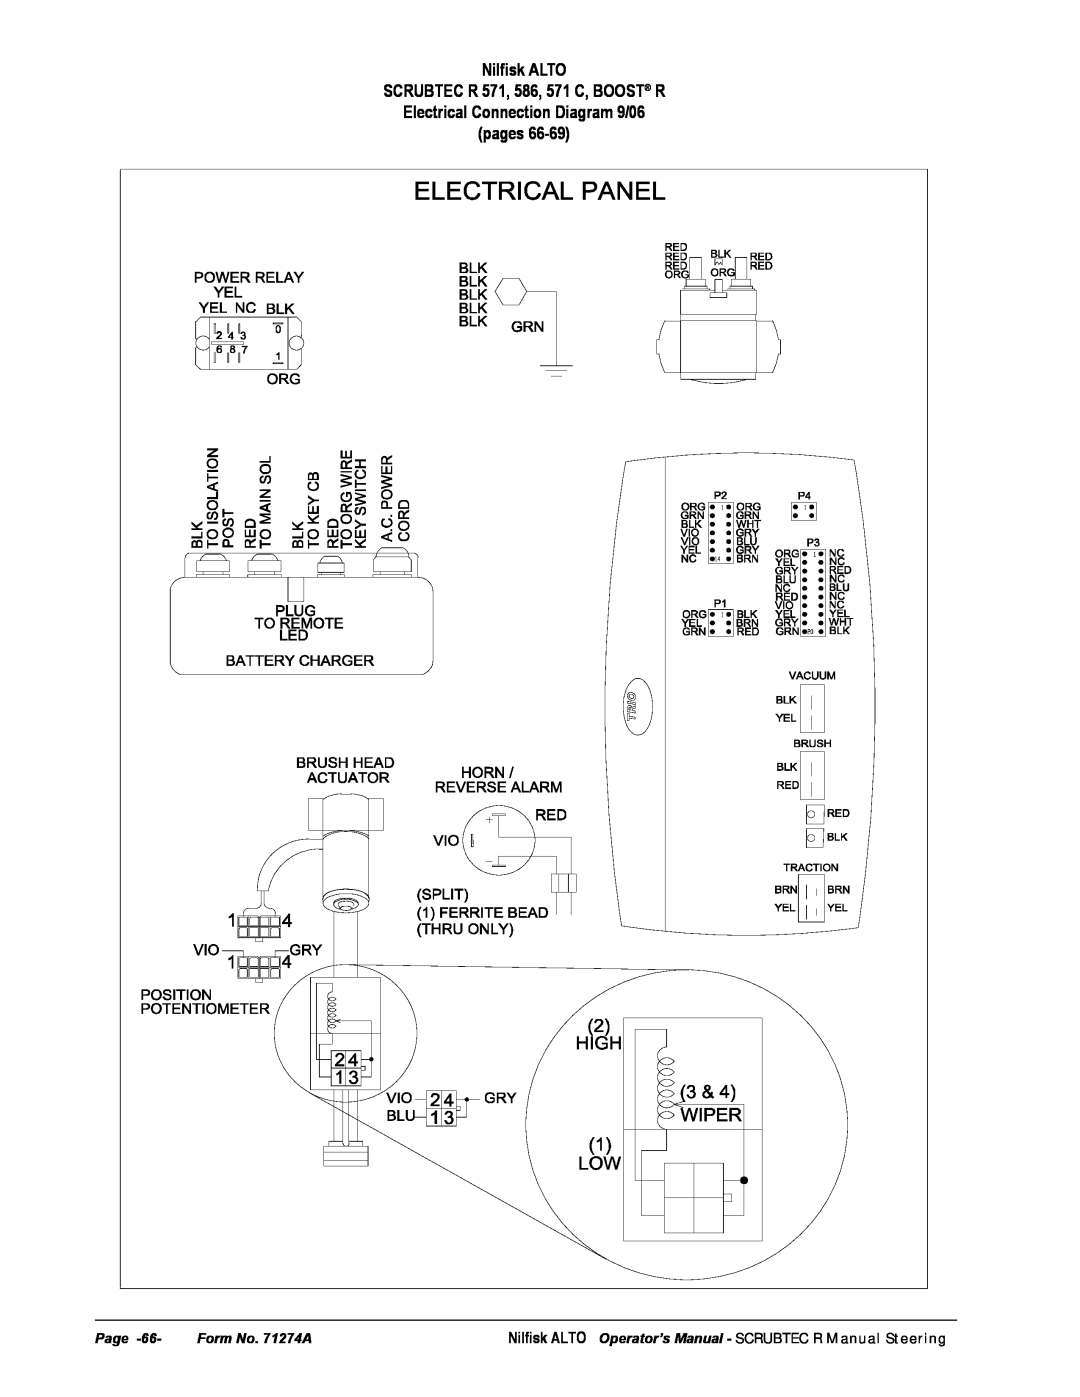 Nilfisk-ALTO manual Nilﬁsk ALTO, SCRUBTEC R 571, 586, 571 C, BOOST R, Electrical Connection Diagram 9/06, pages, Page 